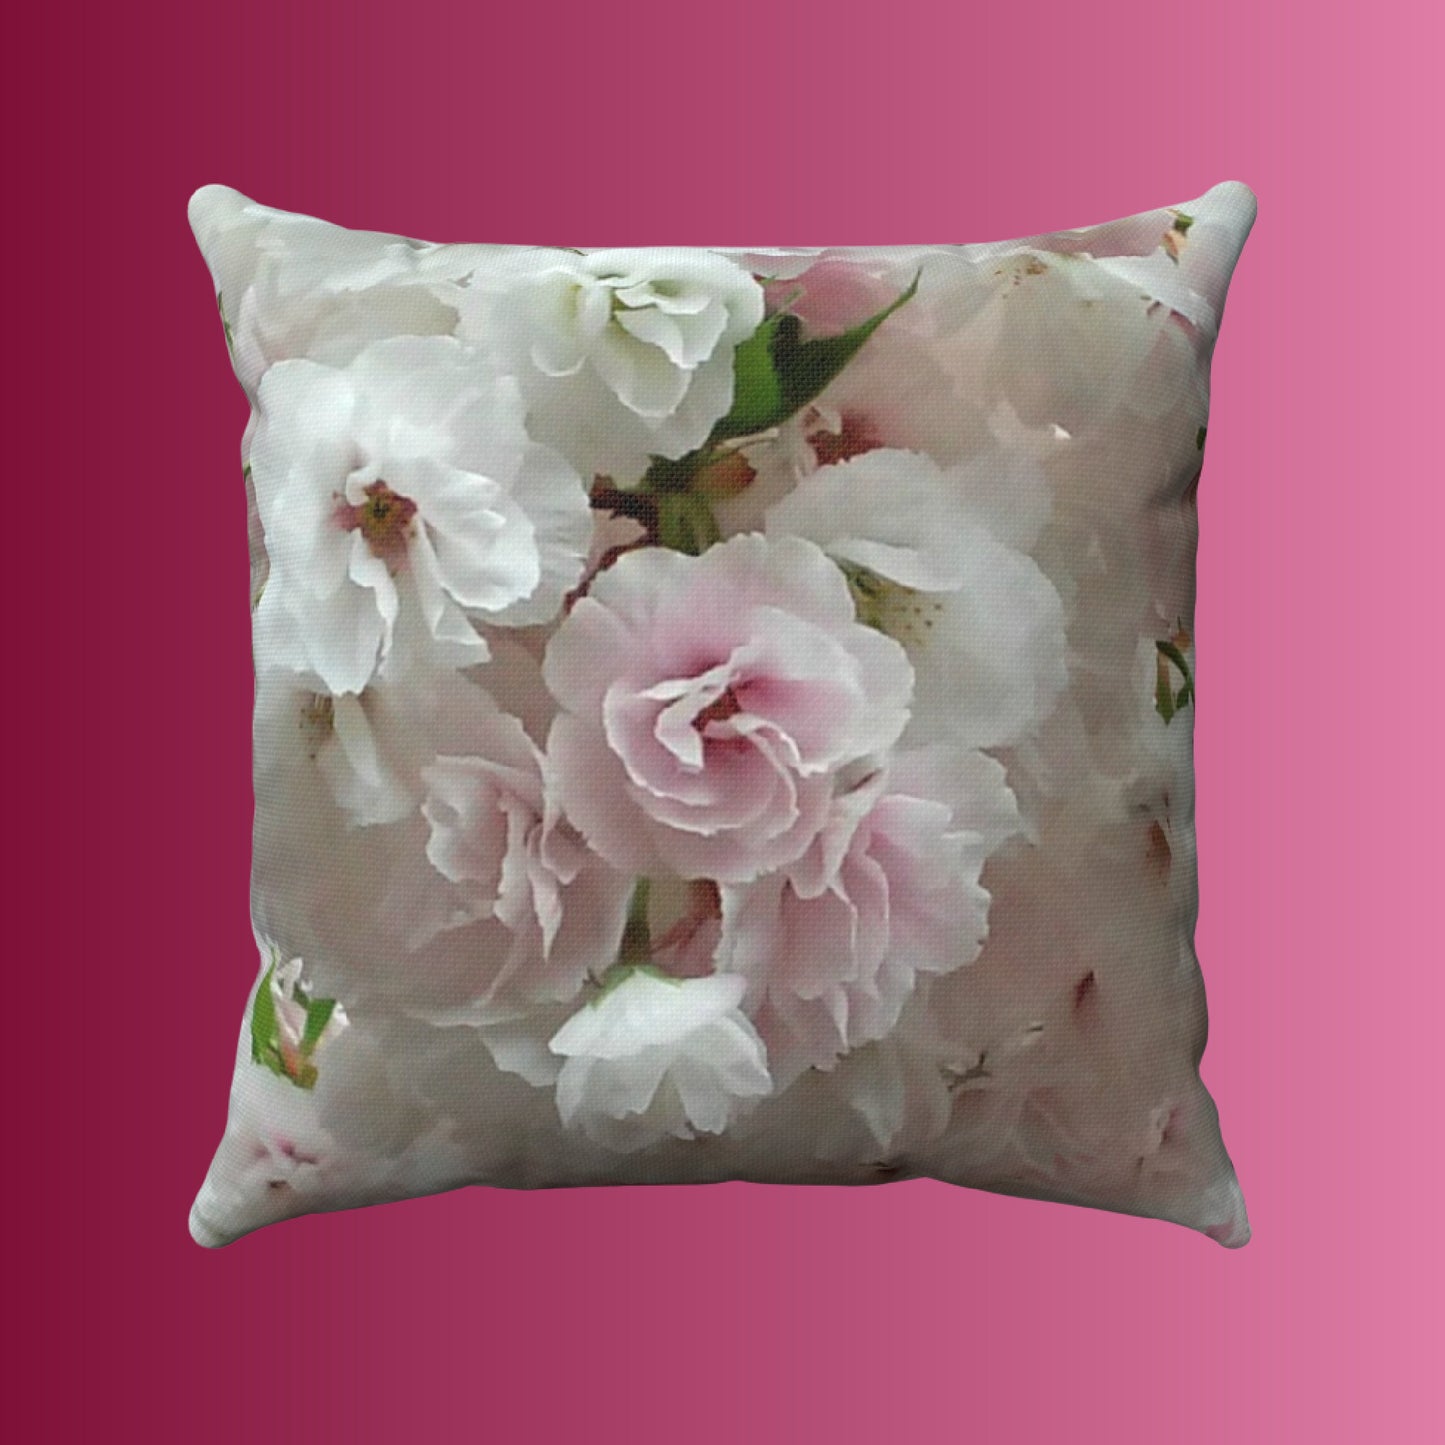 Front and back of our Floral Wedding Pillow